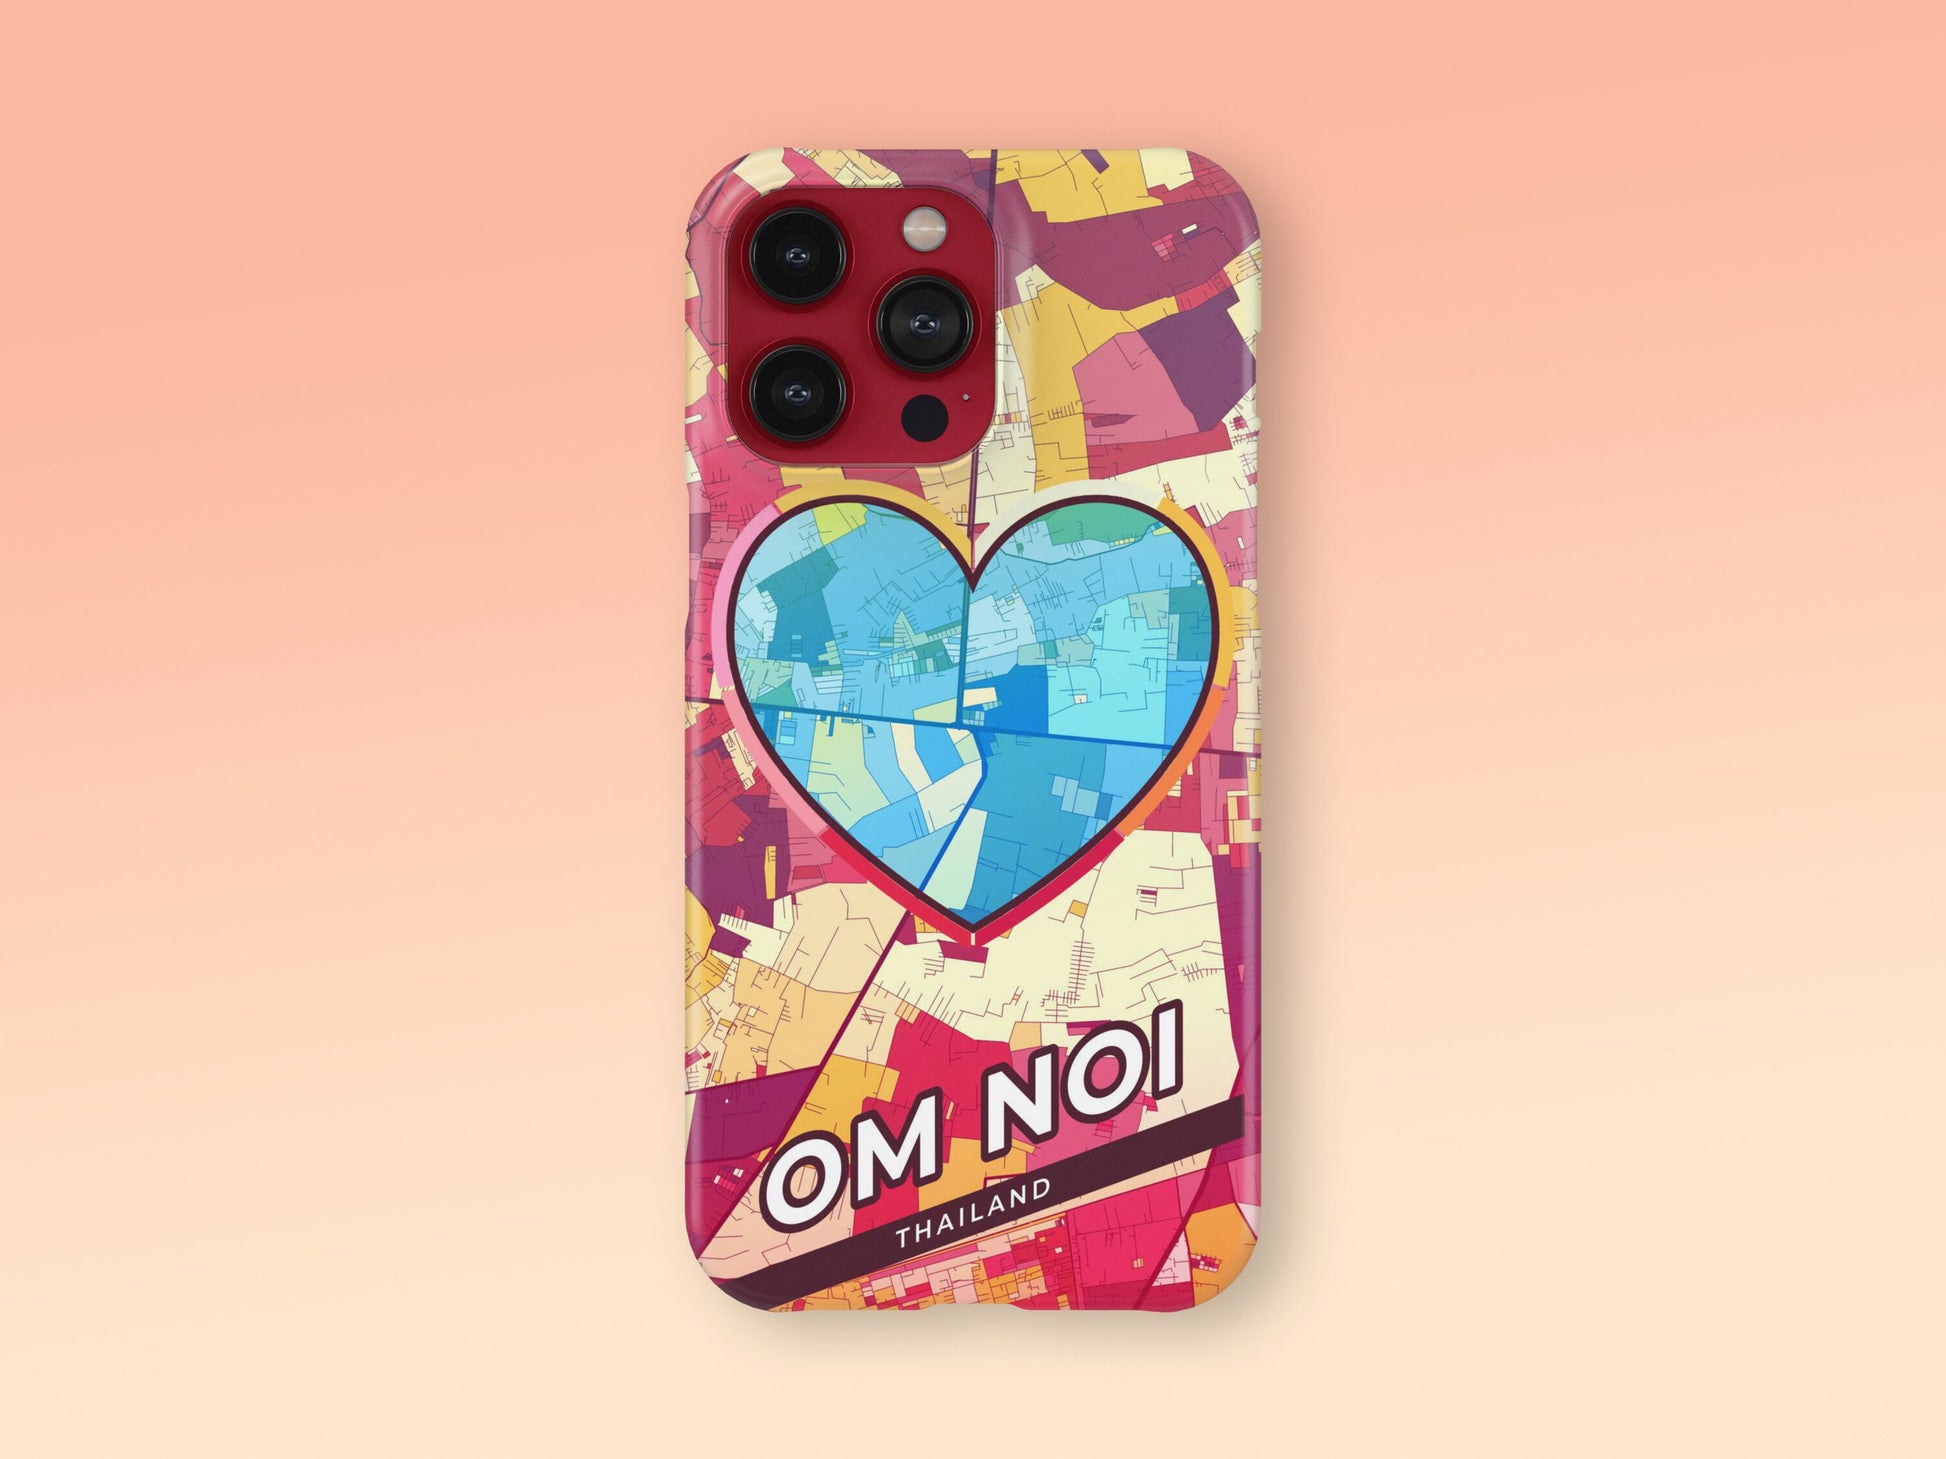 Om Noi Thailand slim phone case with colorful icon 2